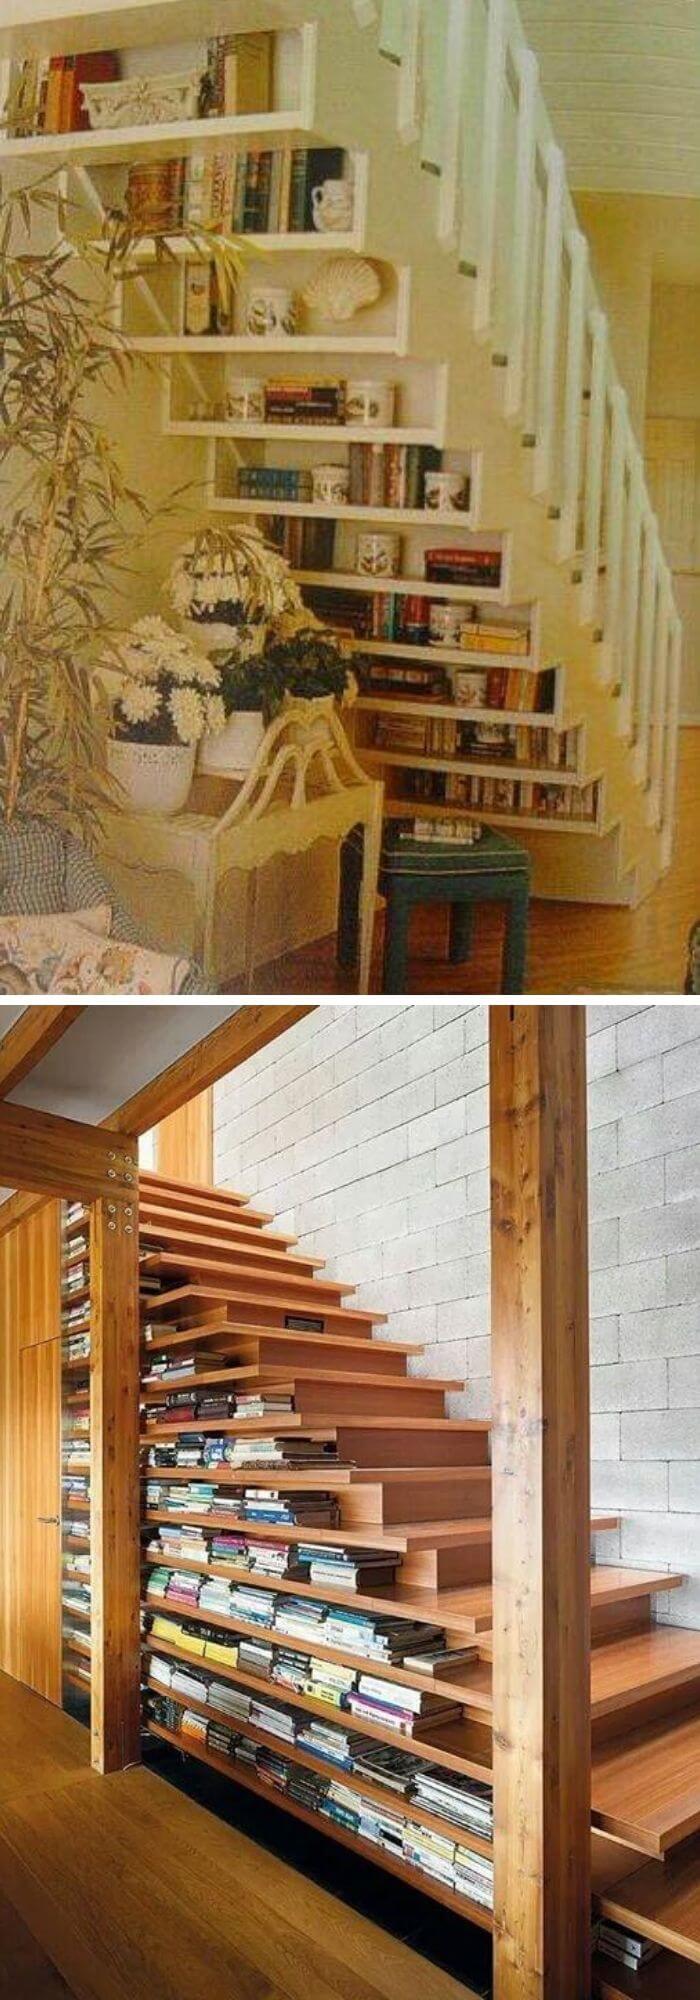 Display your book collection under the stairs